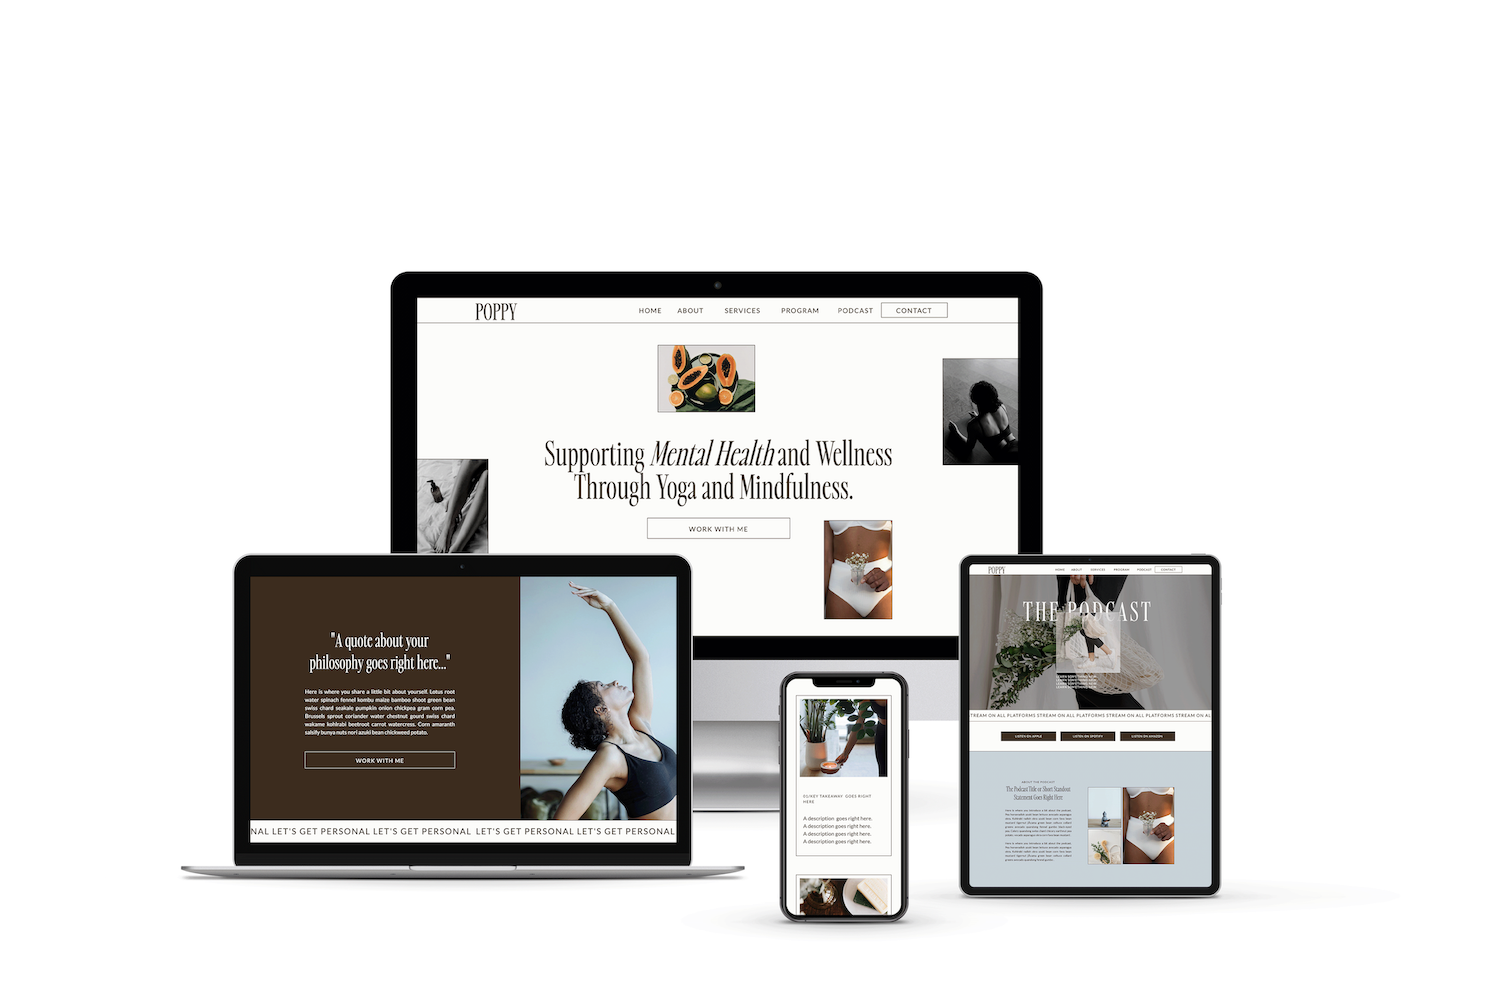 Laptop, ipad, and phone mockup of showit website template for mental health, wellness, and yoga instructors